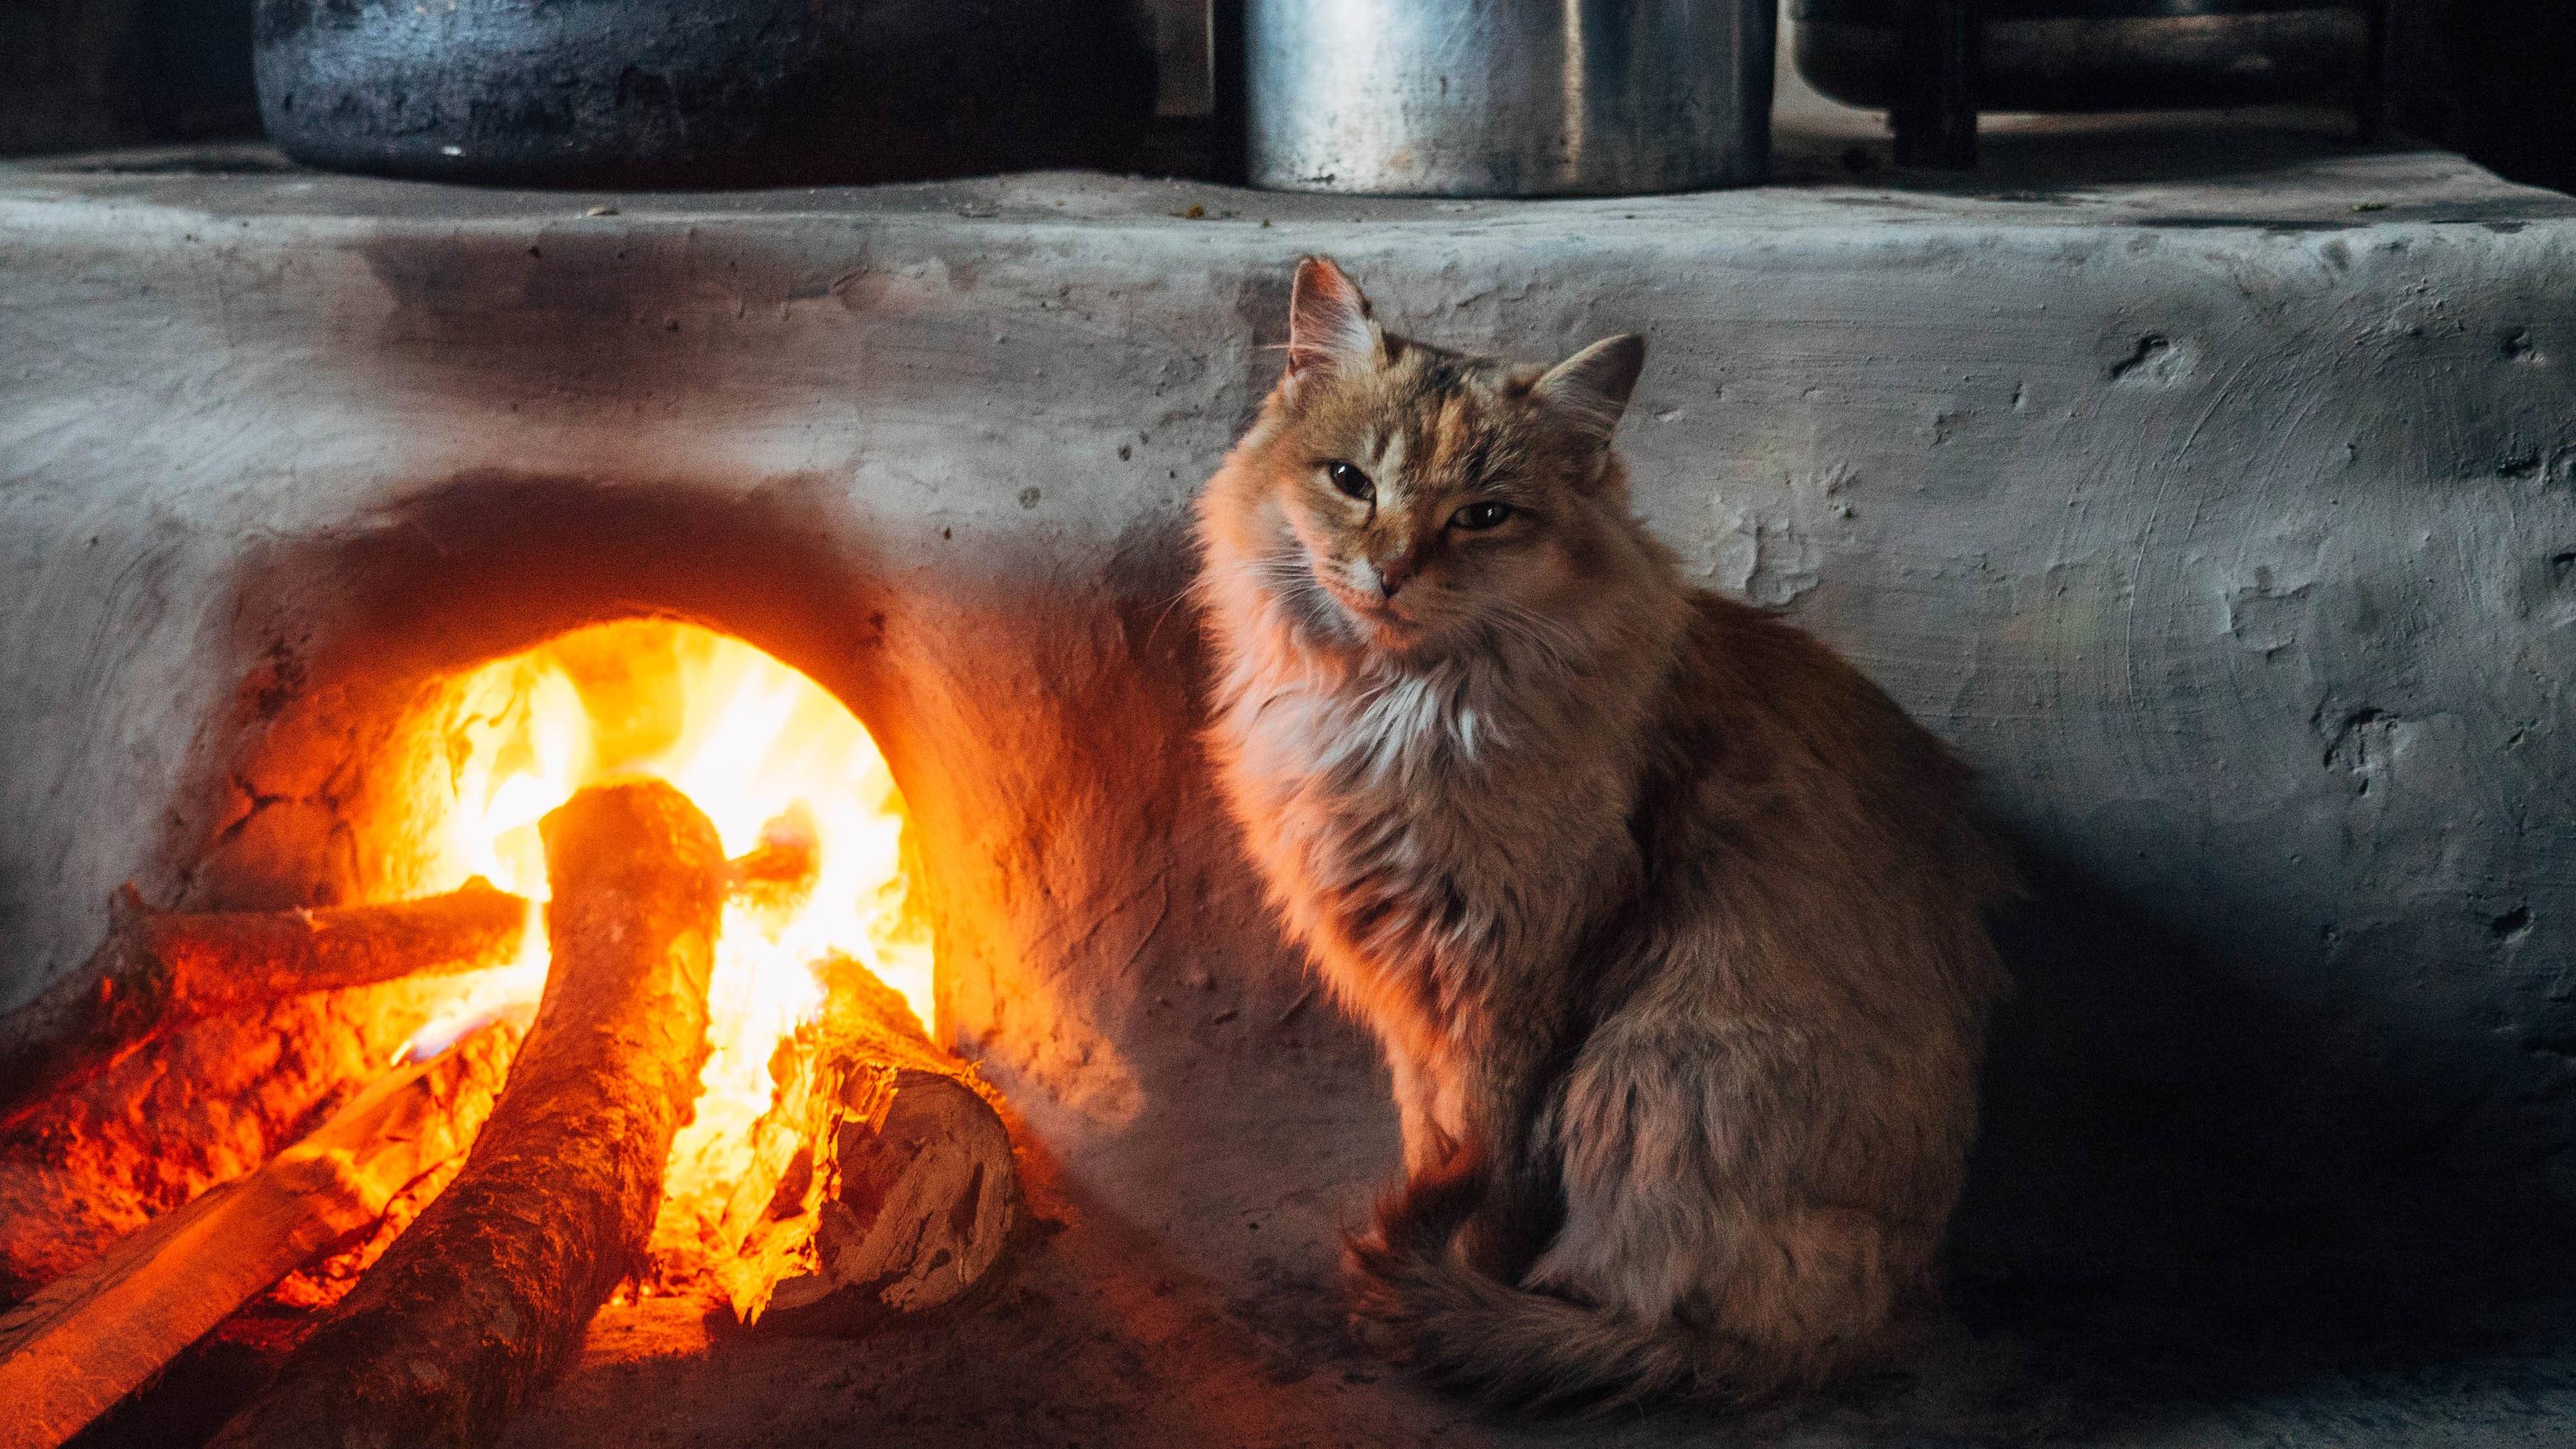 Caturday pic of a cat warming itself by a wood fired oven